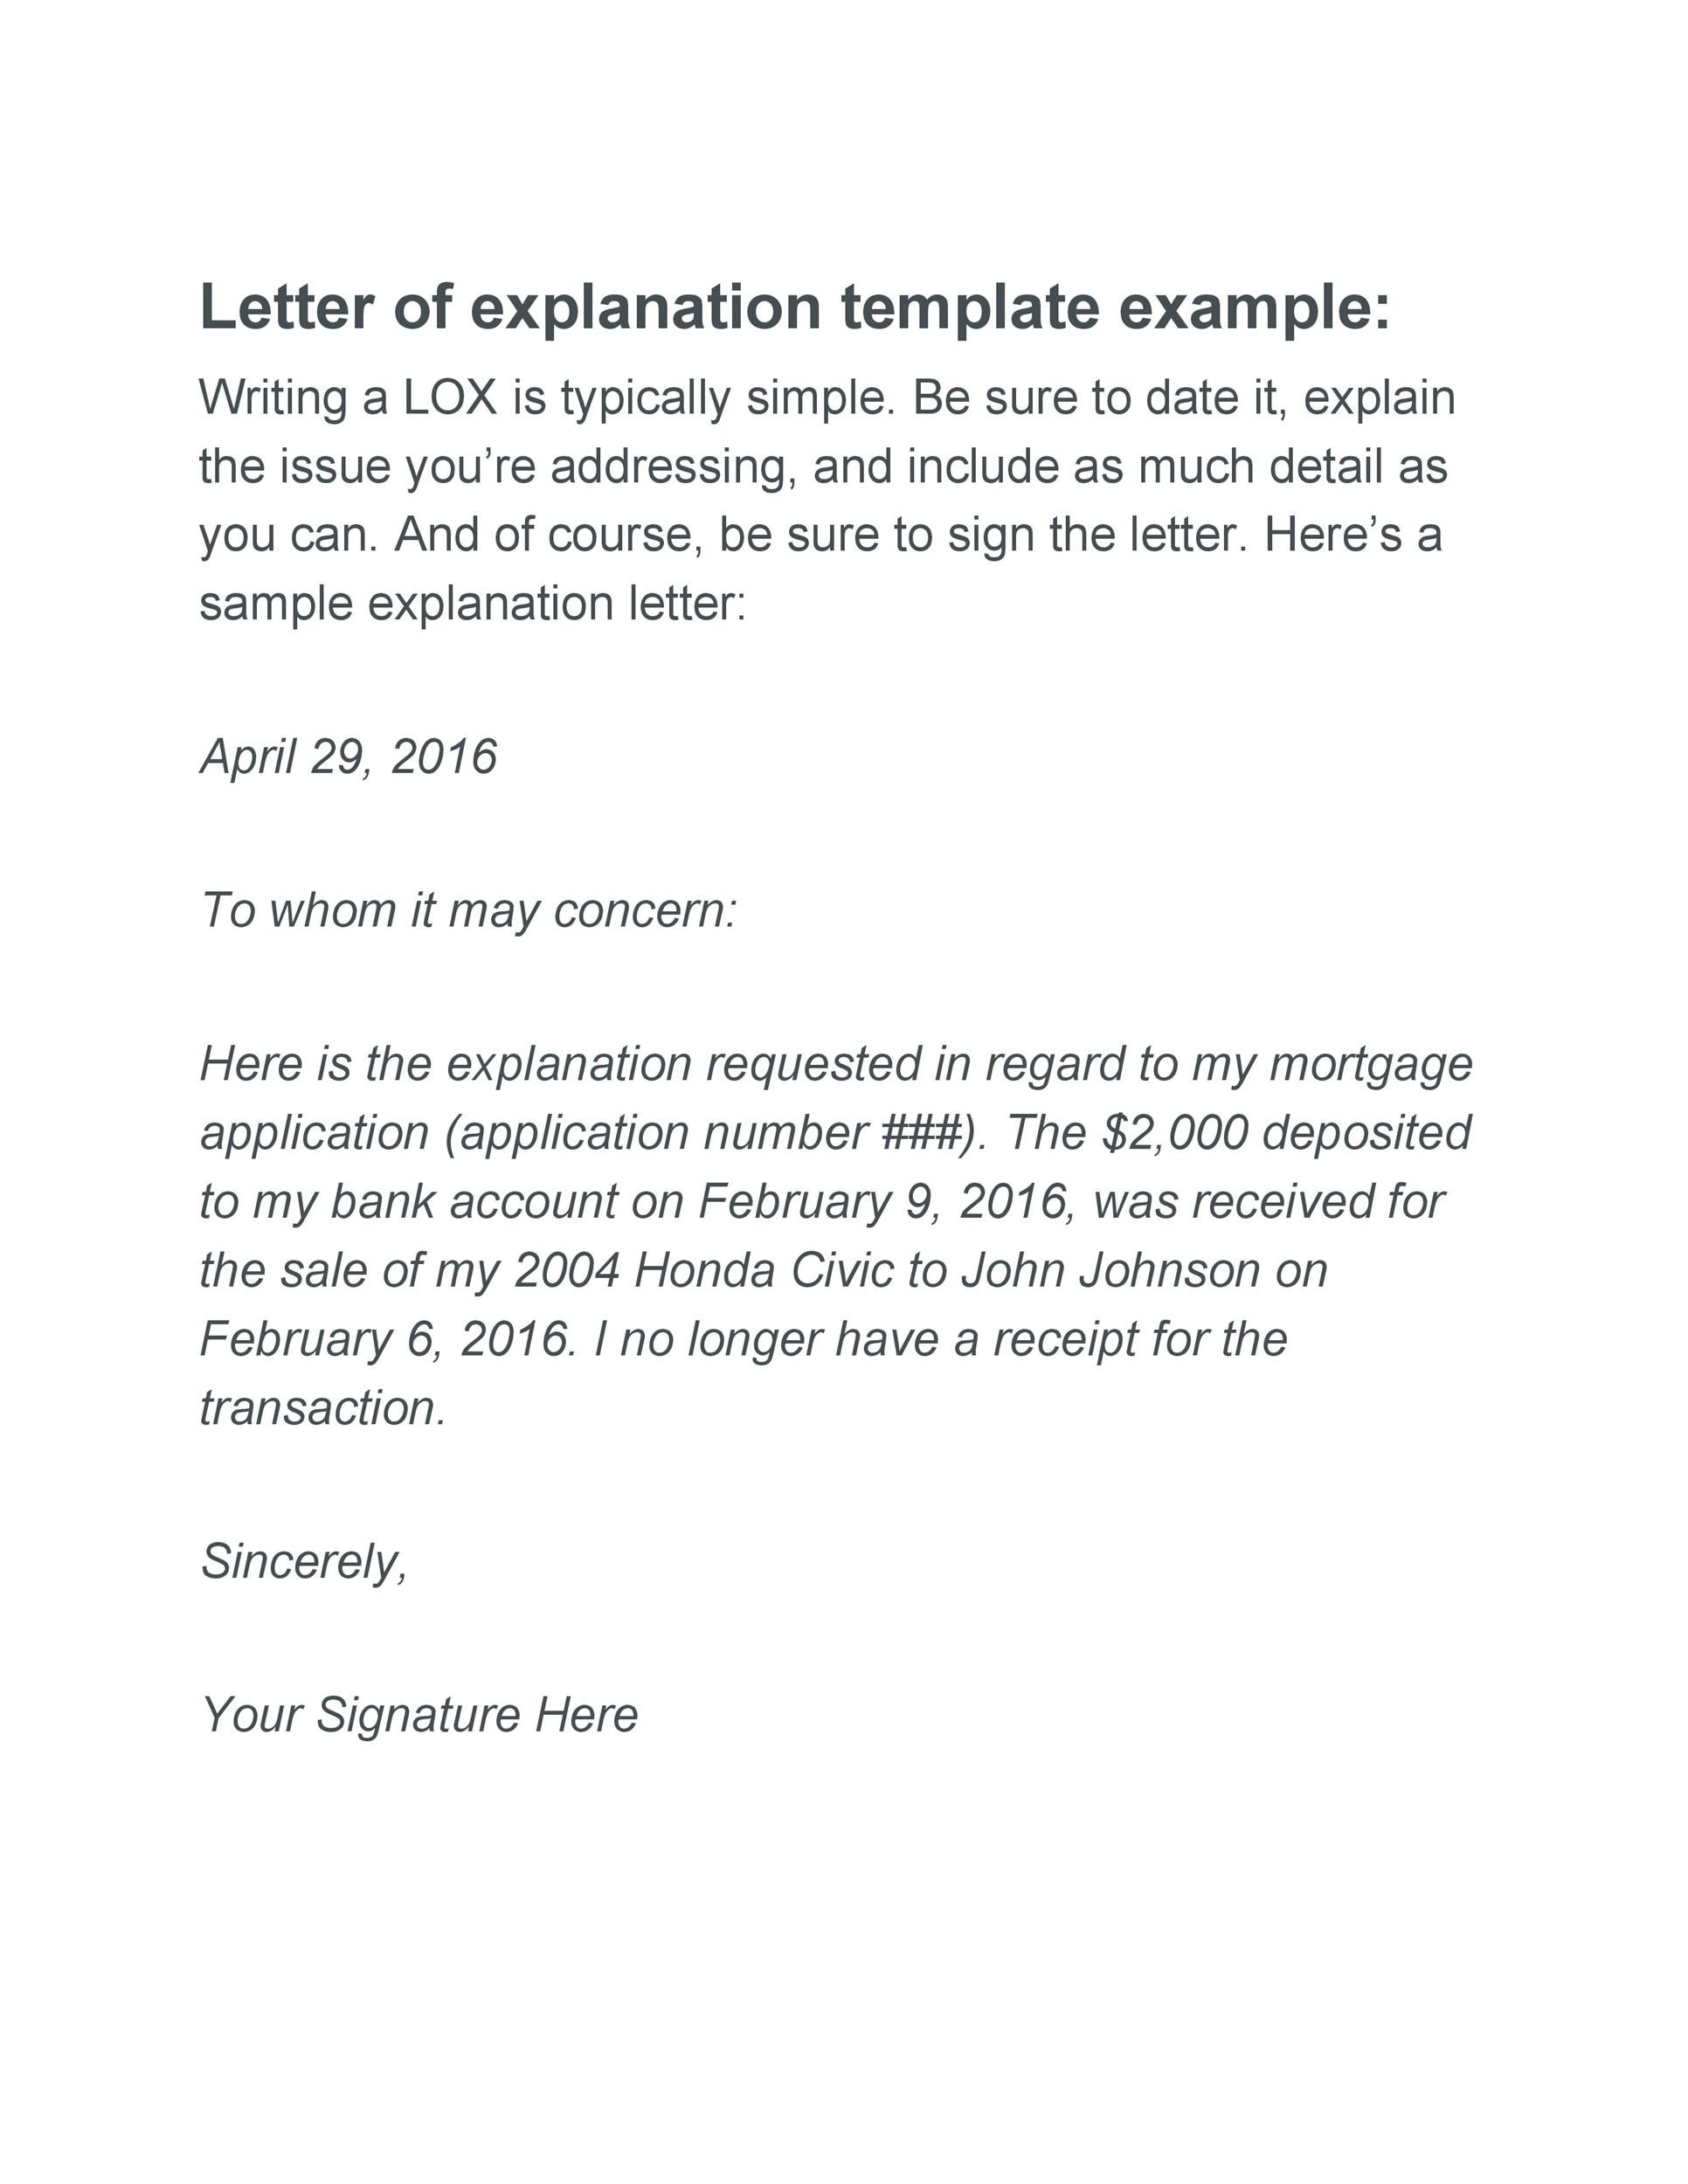 Letter Of Explanation For Mortgage Credit Inquiries ...